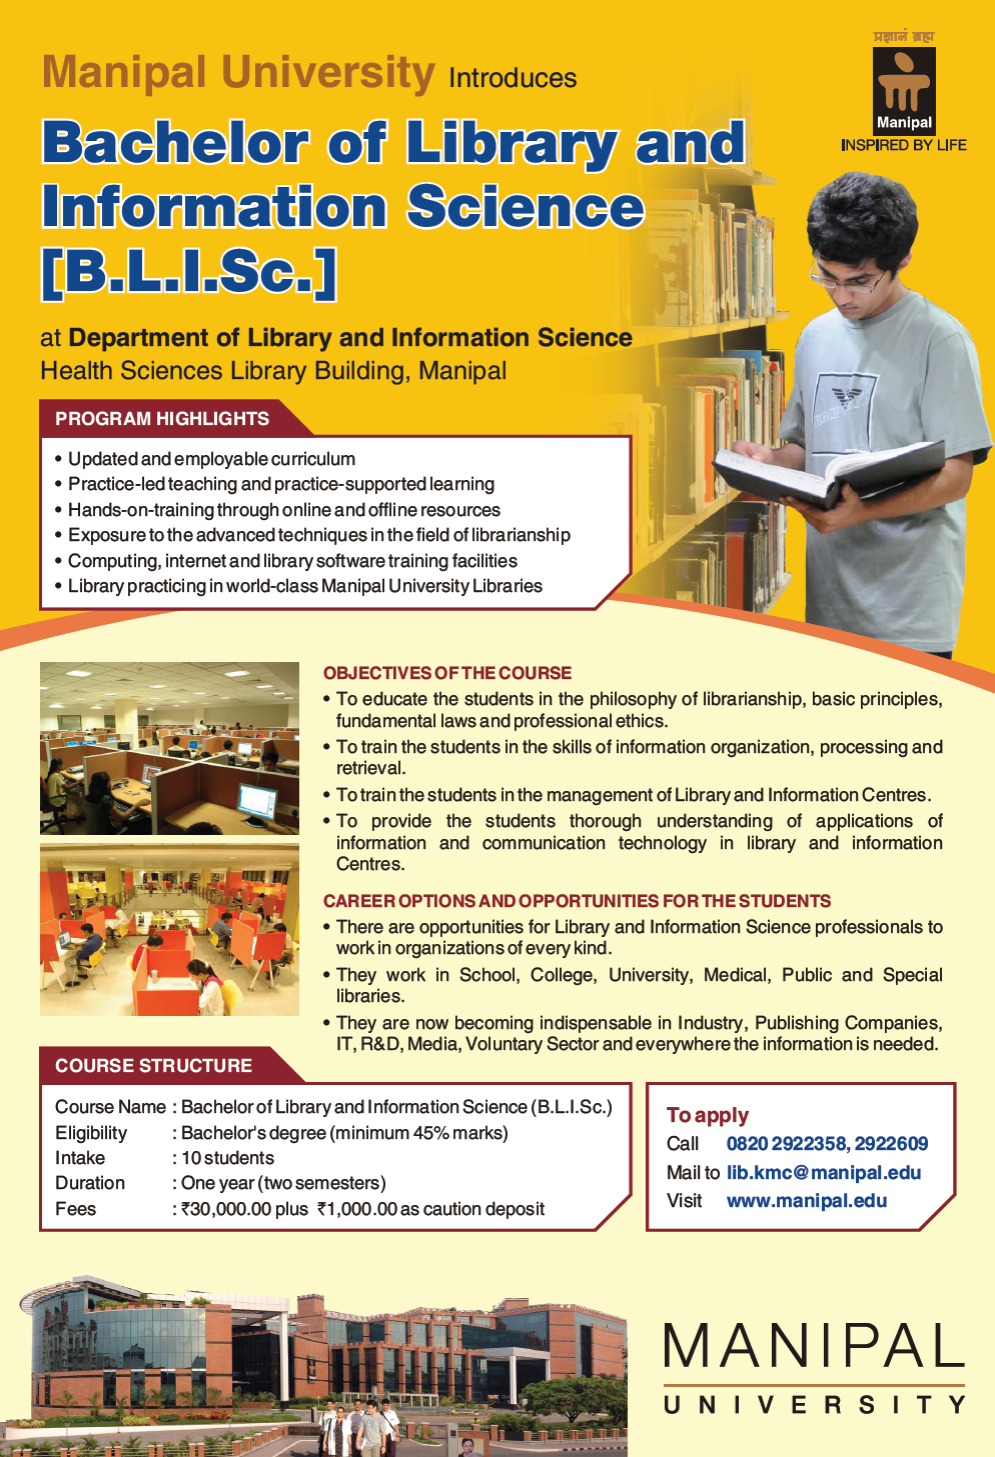 phd admission in library and information science